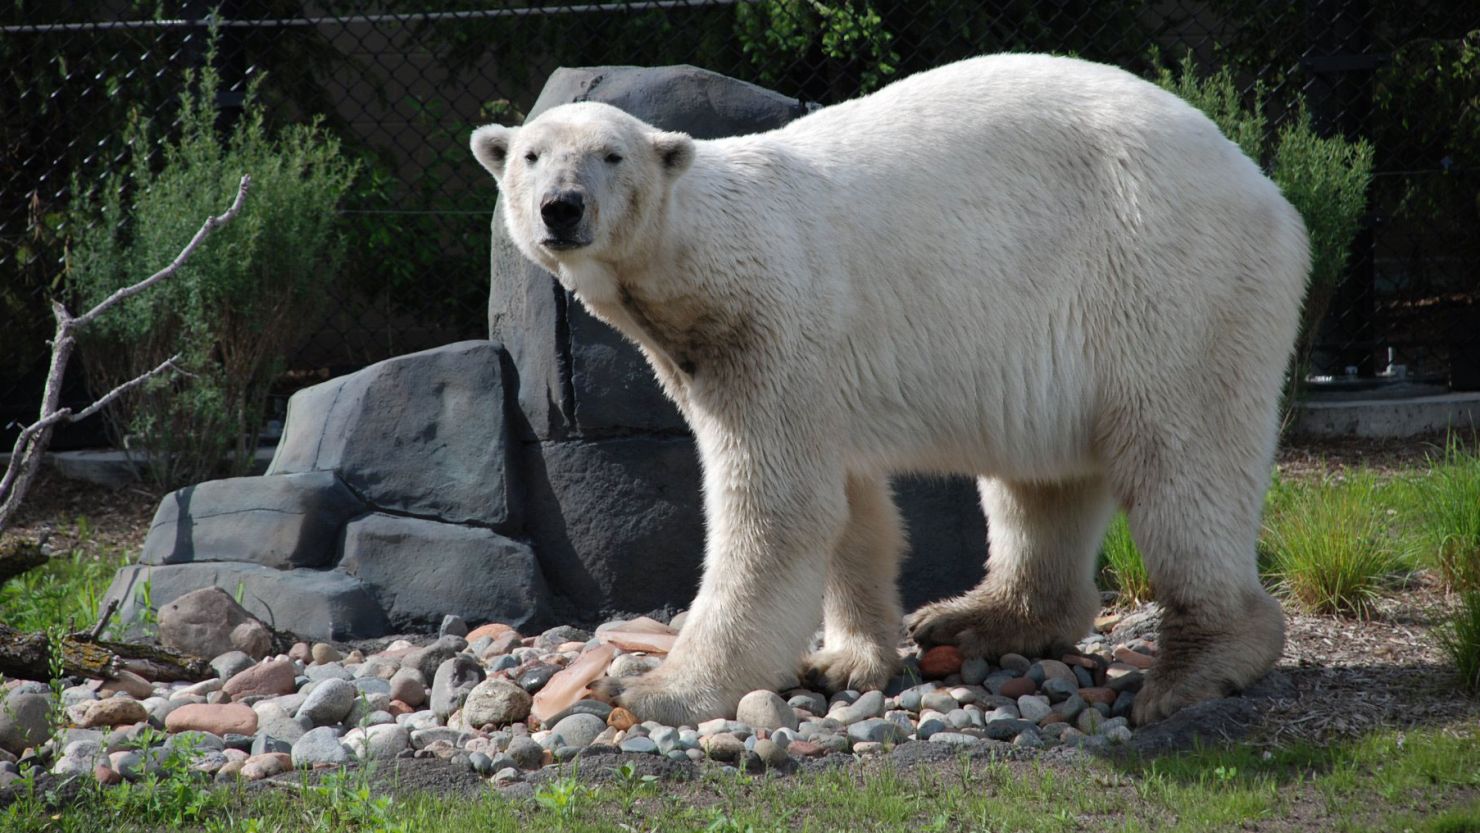 Buzz the polar bear had suffered health problems due to suspected neurological issues, the zoo said.